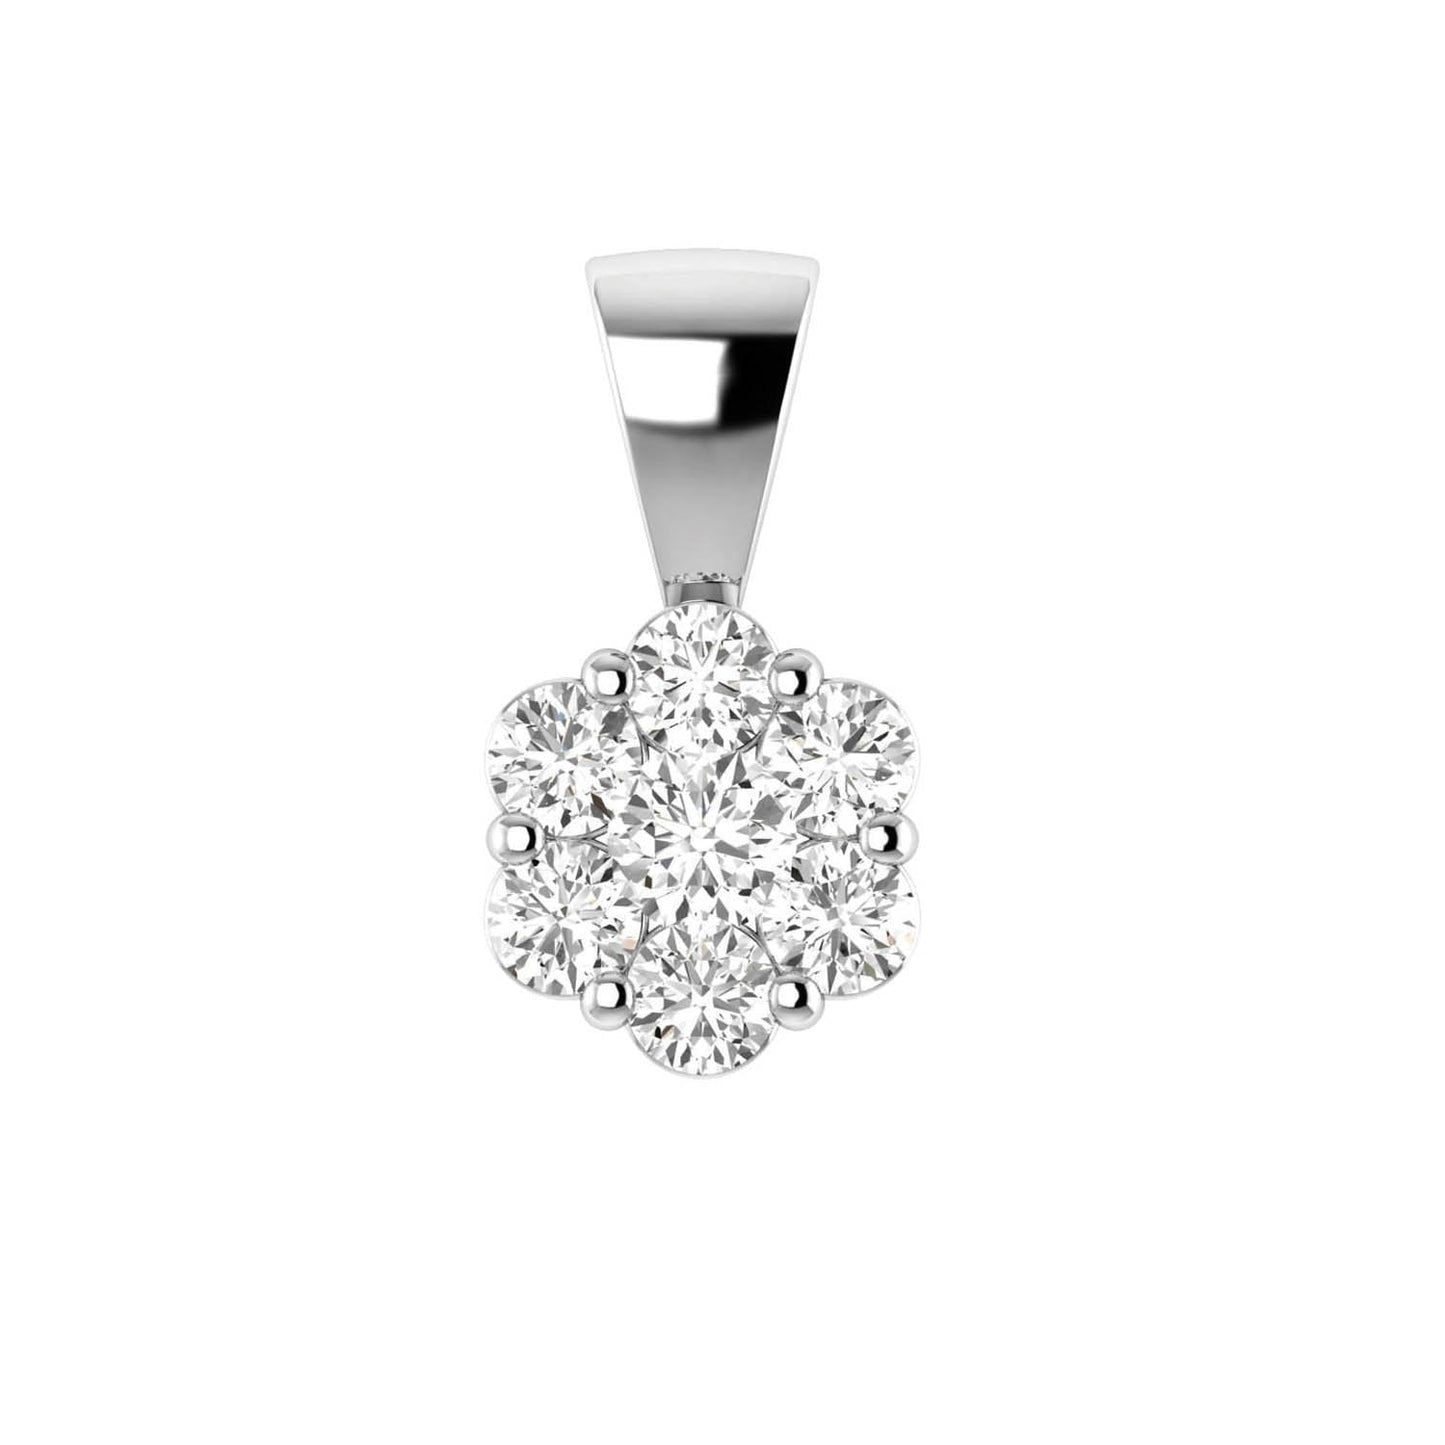 Cluster Diamond Pendant with 0.75ct Diamonds in 9K White Gold - RJ9WPCLUS75GH